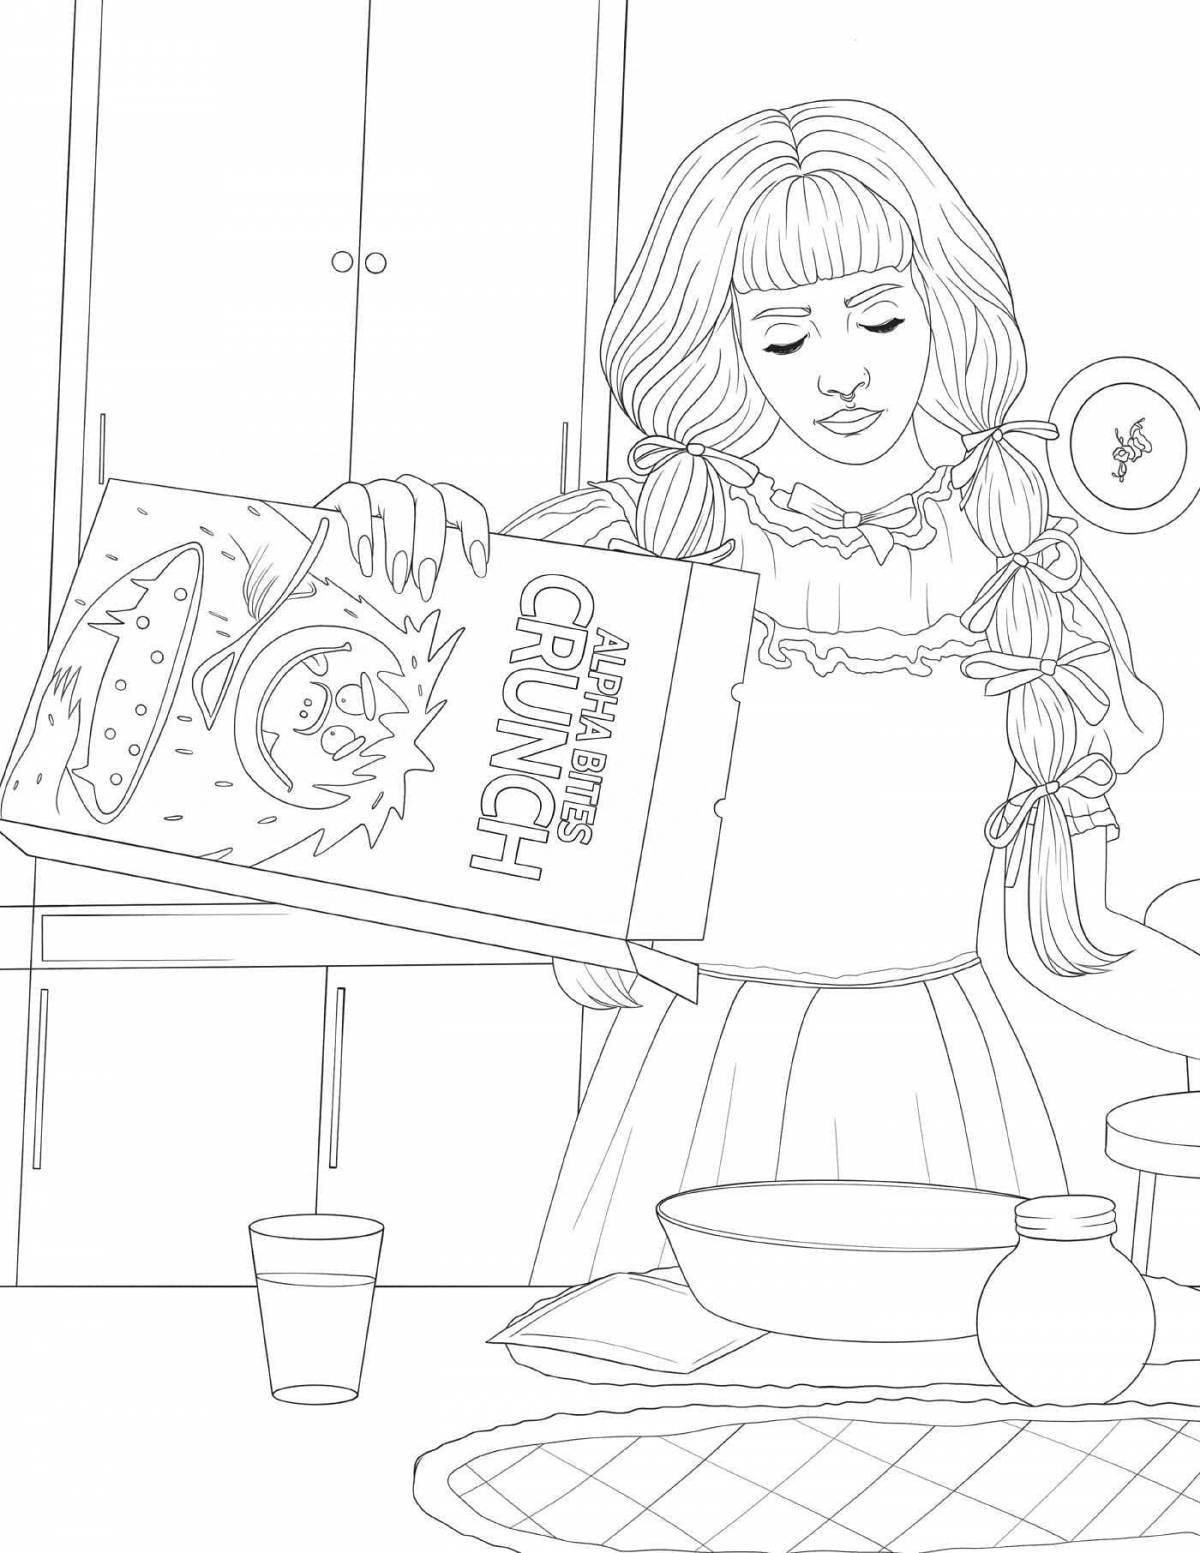 Coloring page charming cry baby melanie martinez